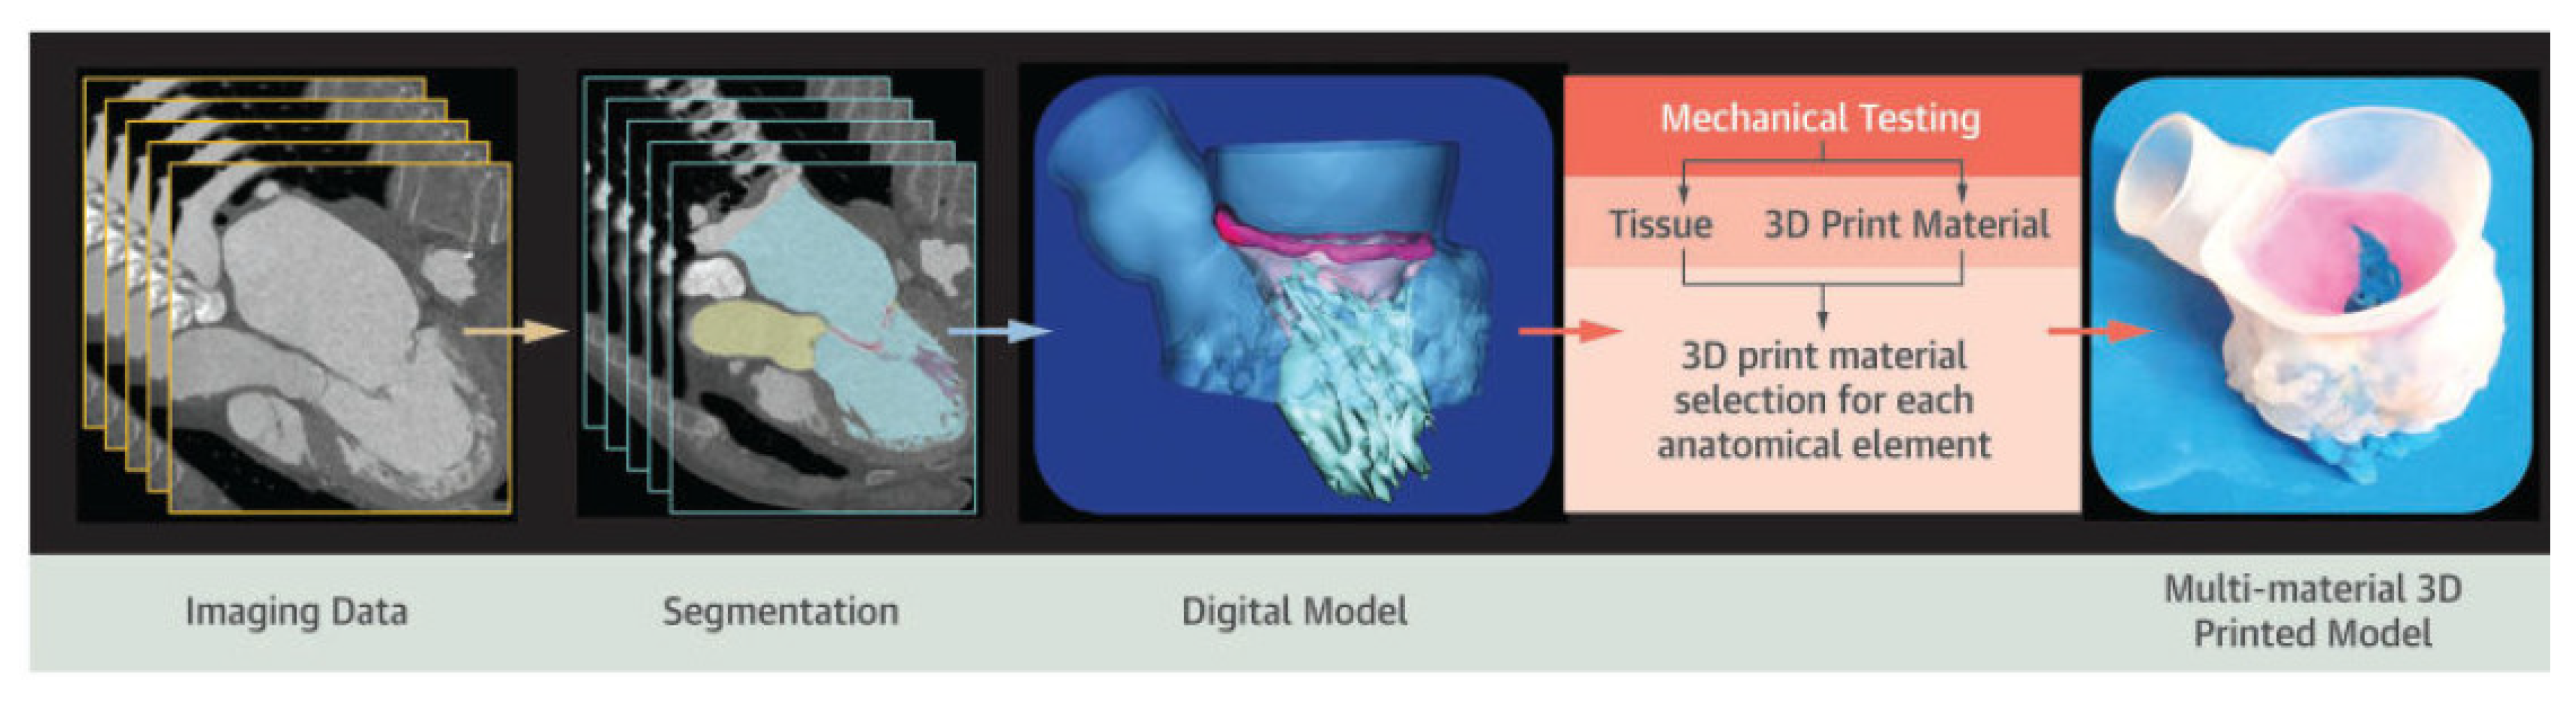 High-resolution micro-CT for 3D infarct characterization and segmentation  in mice stroke models